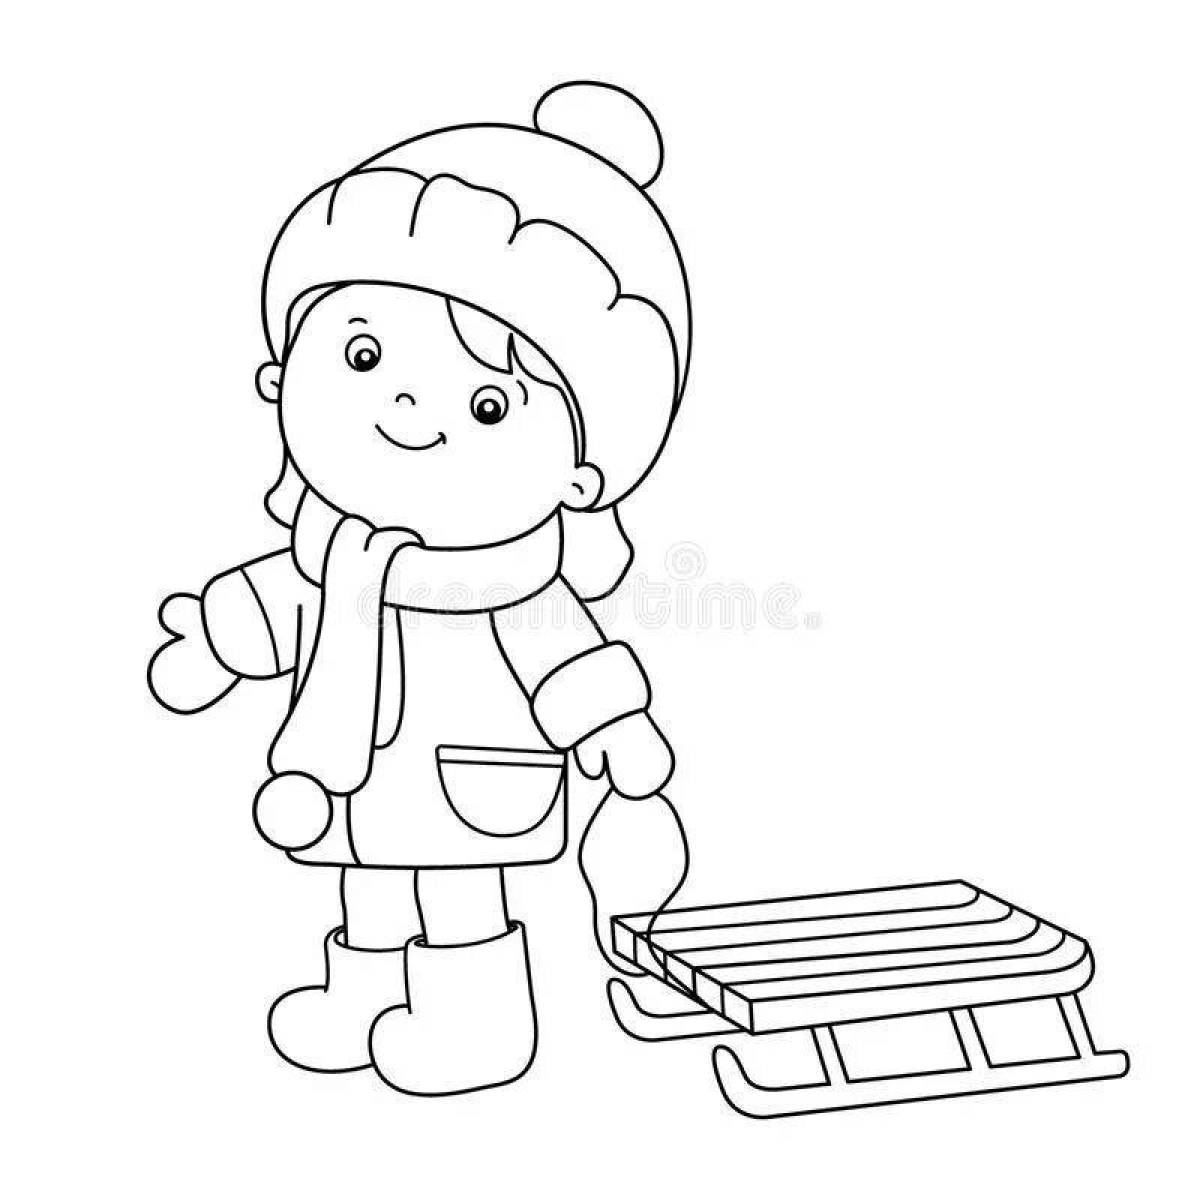 Comfortable coloring boy in winter clothes